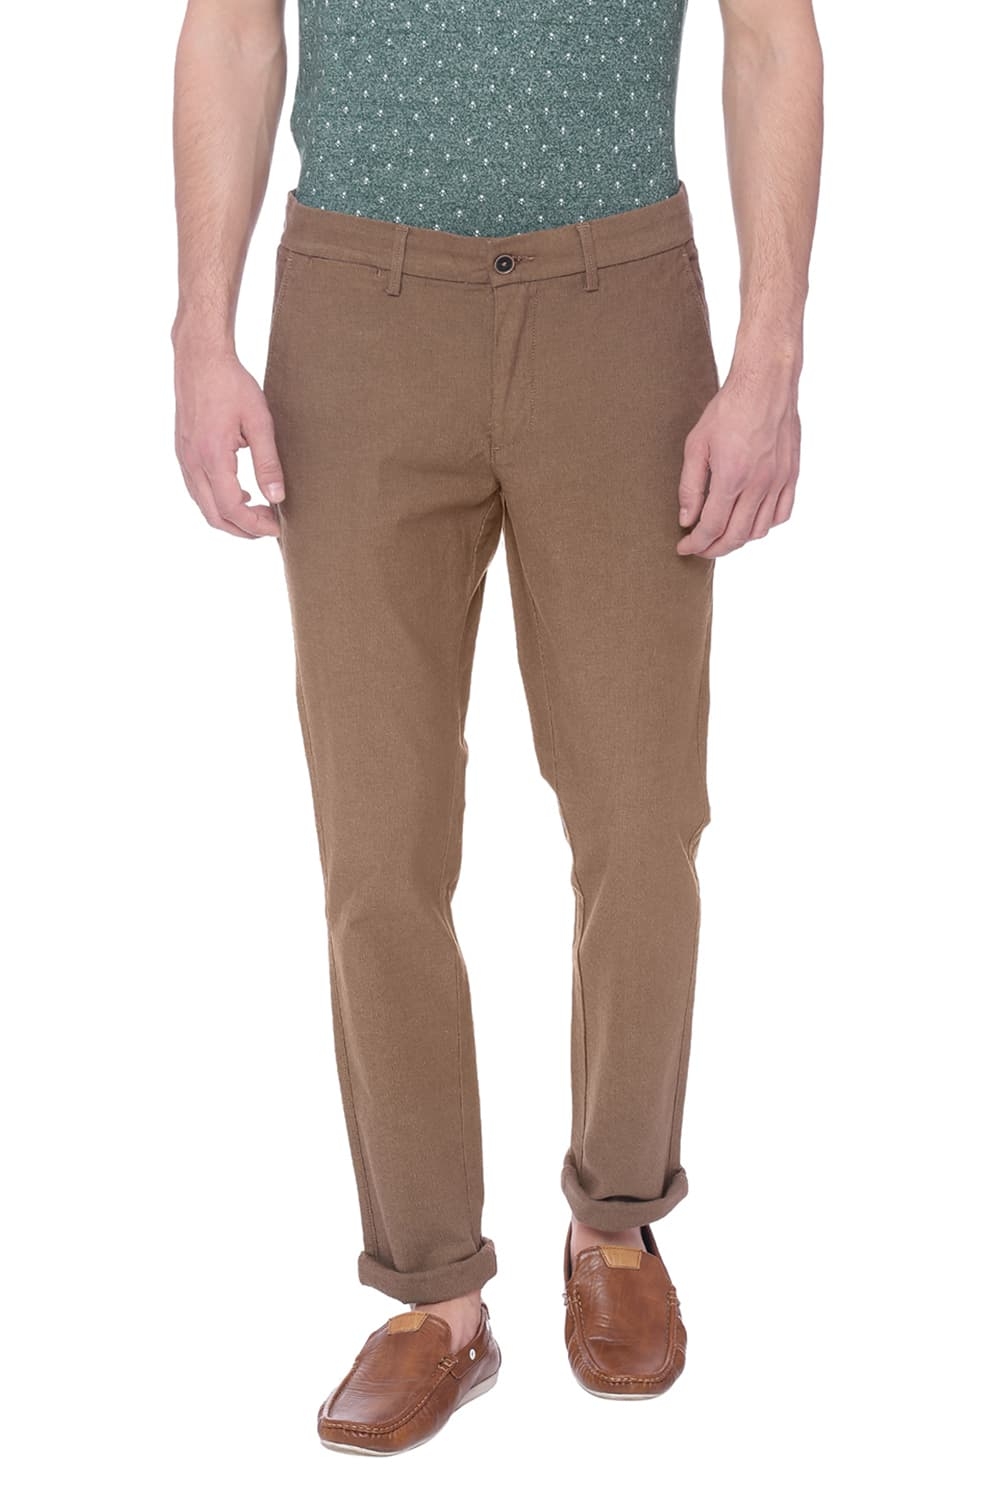 Basics | Basics Tapered Fit Antique Bronze Brown Stretch Trouser